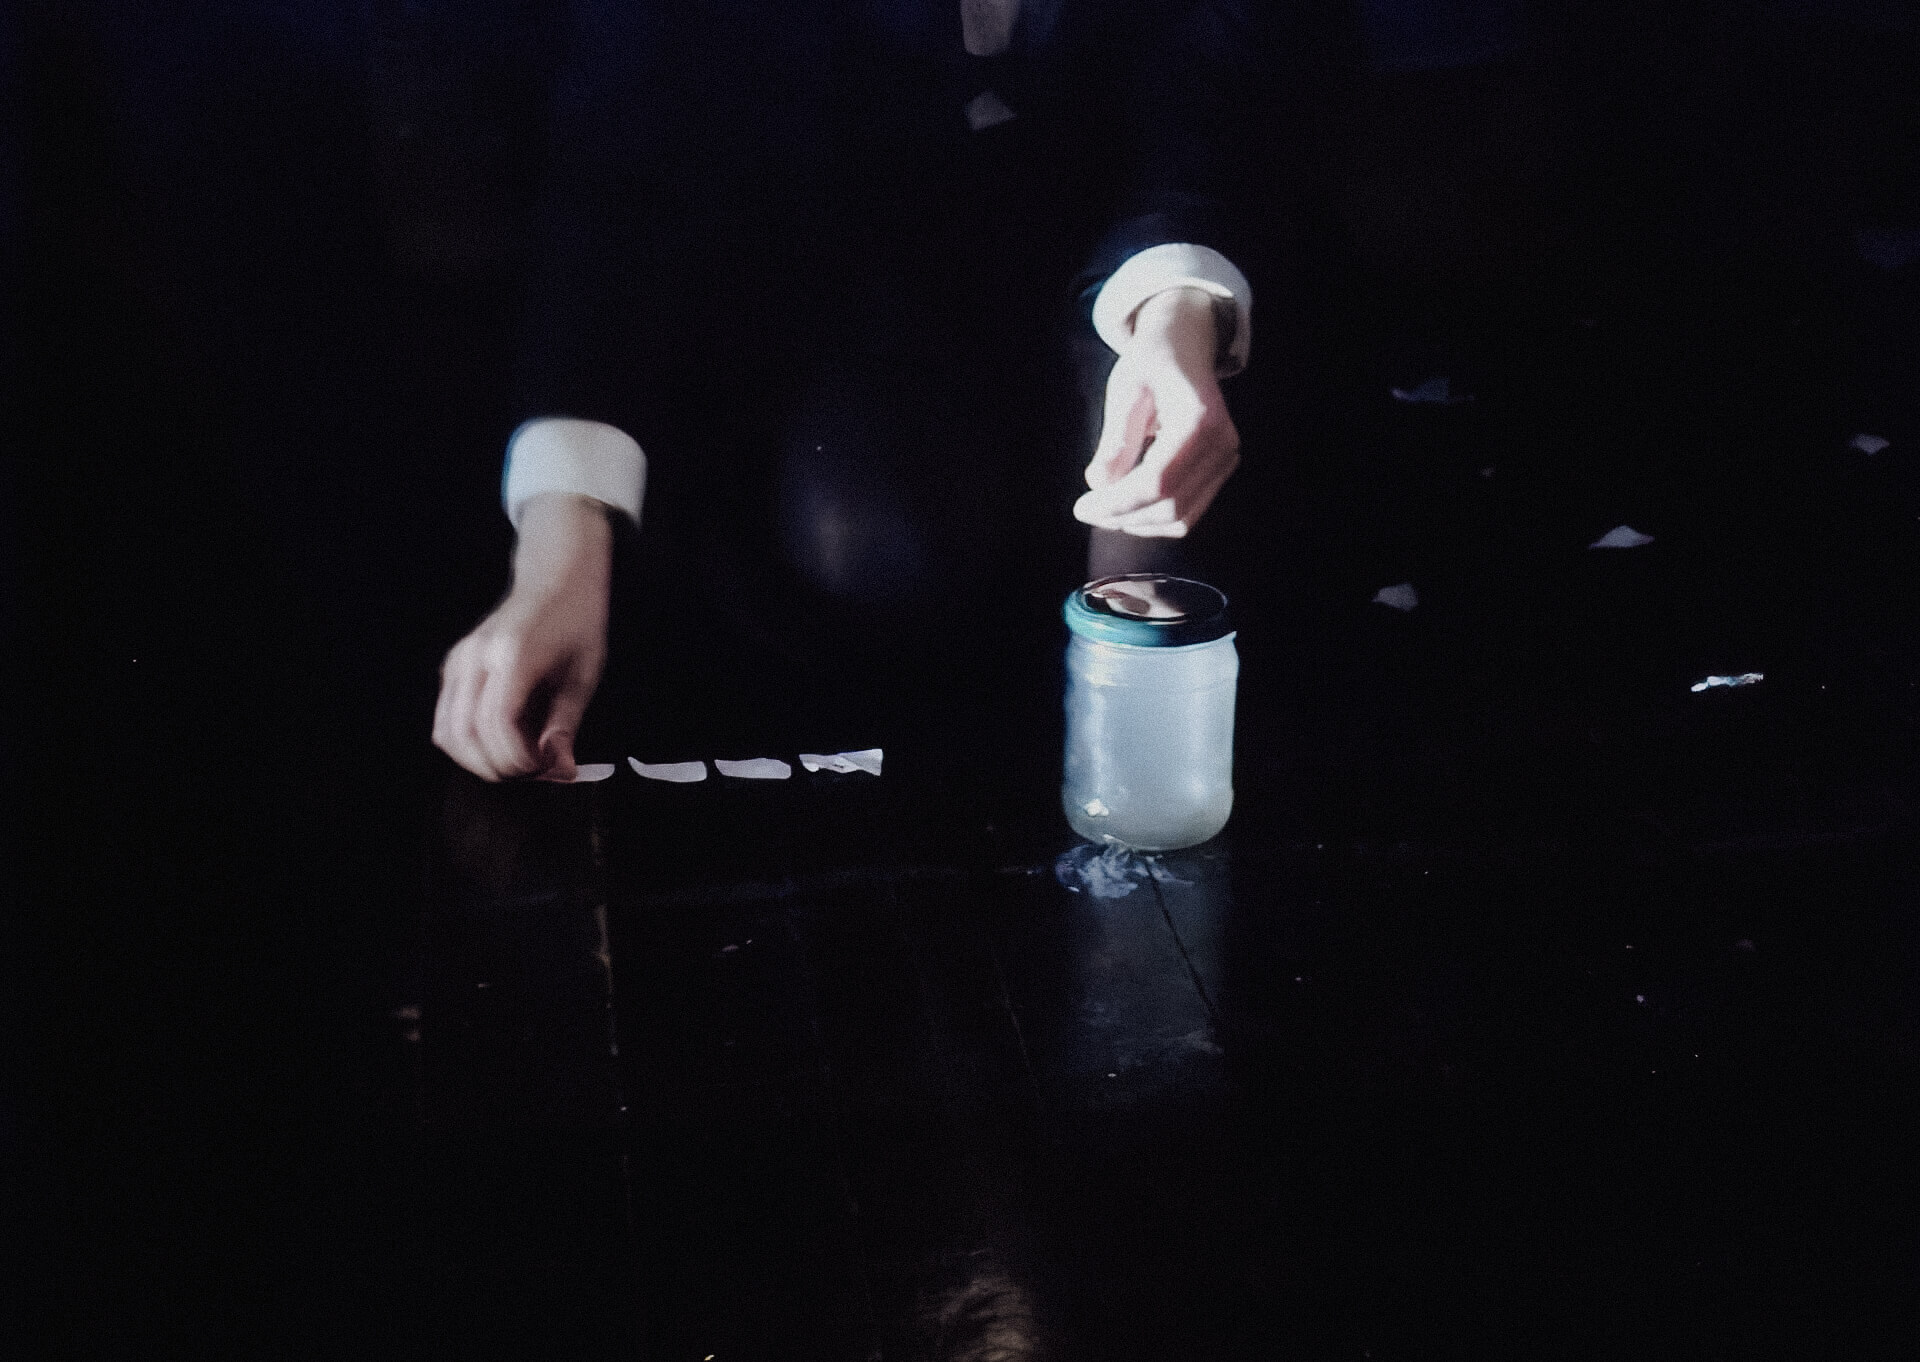 Close up and blurry image of the hands of a performer knelt on the floor. The performer is arranging little piece of paper in one line next to a jar